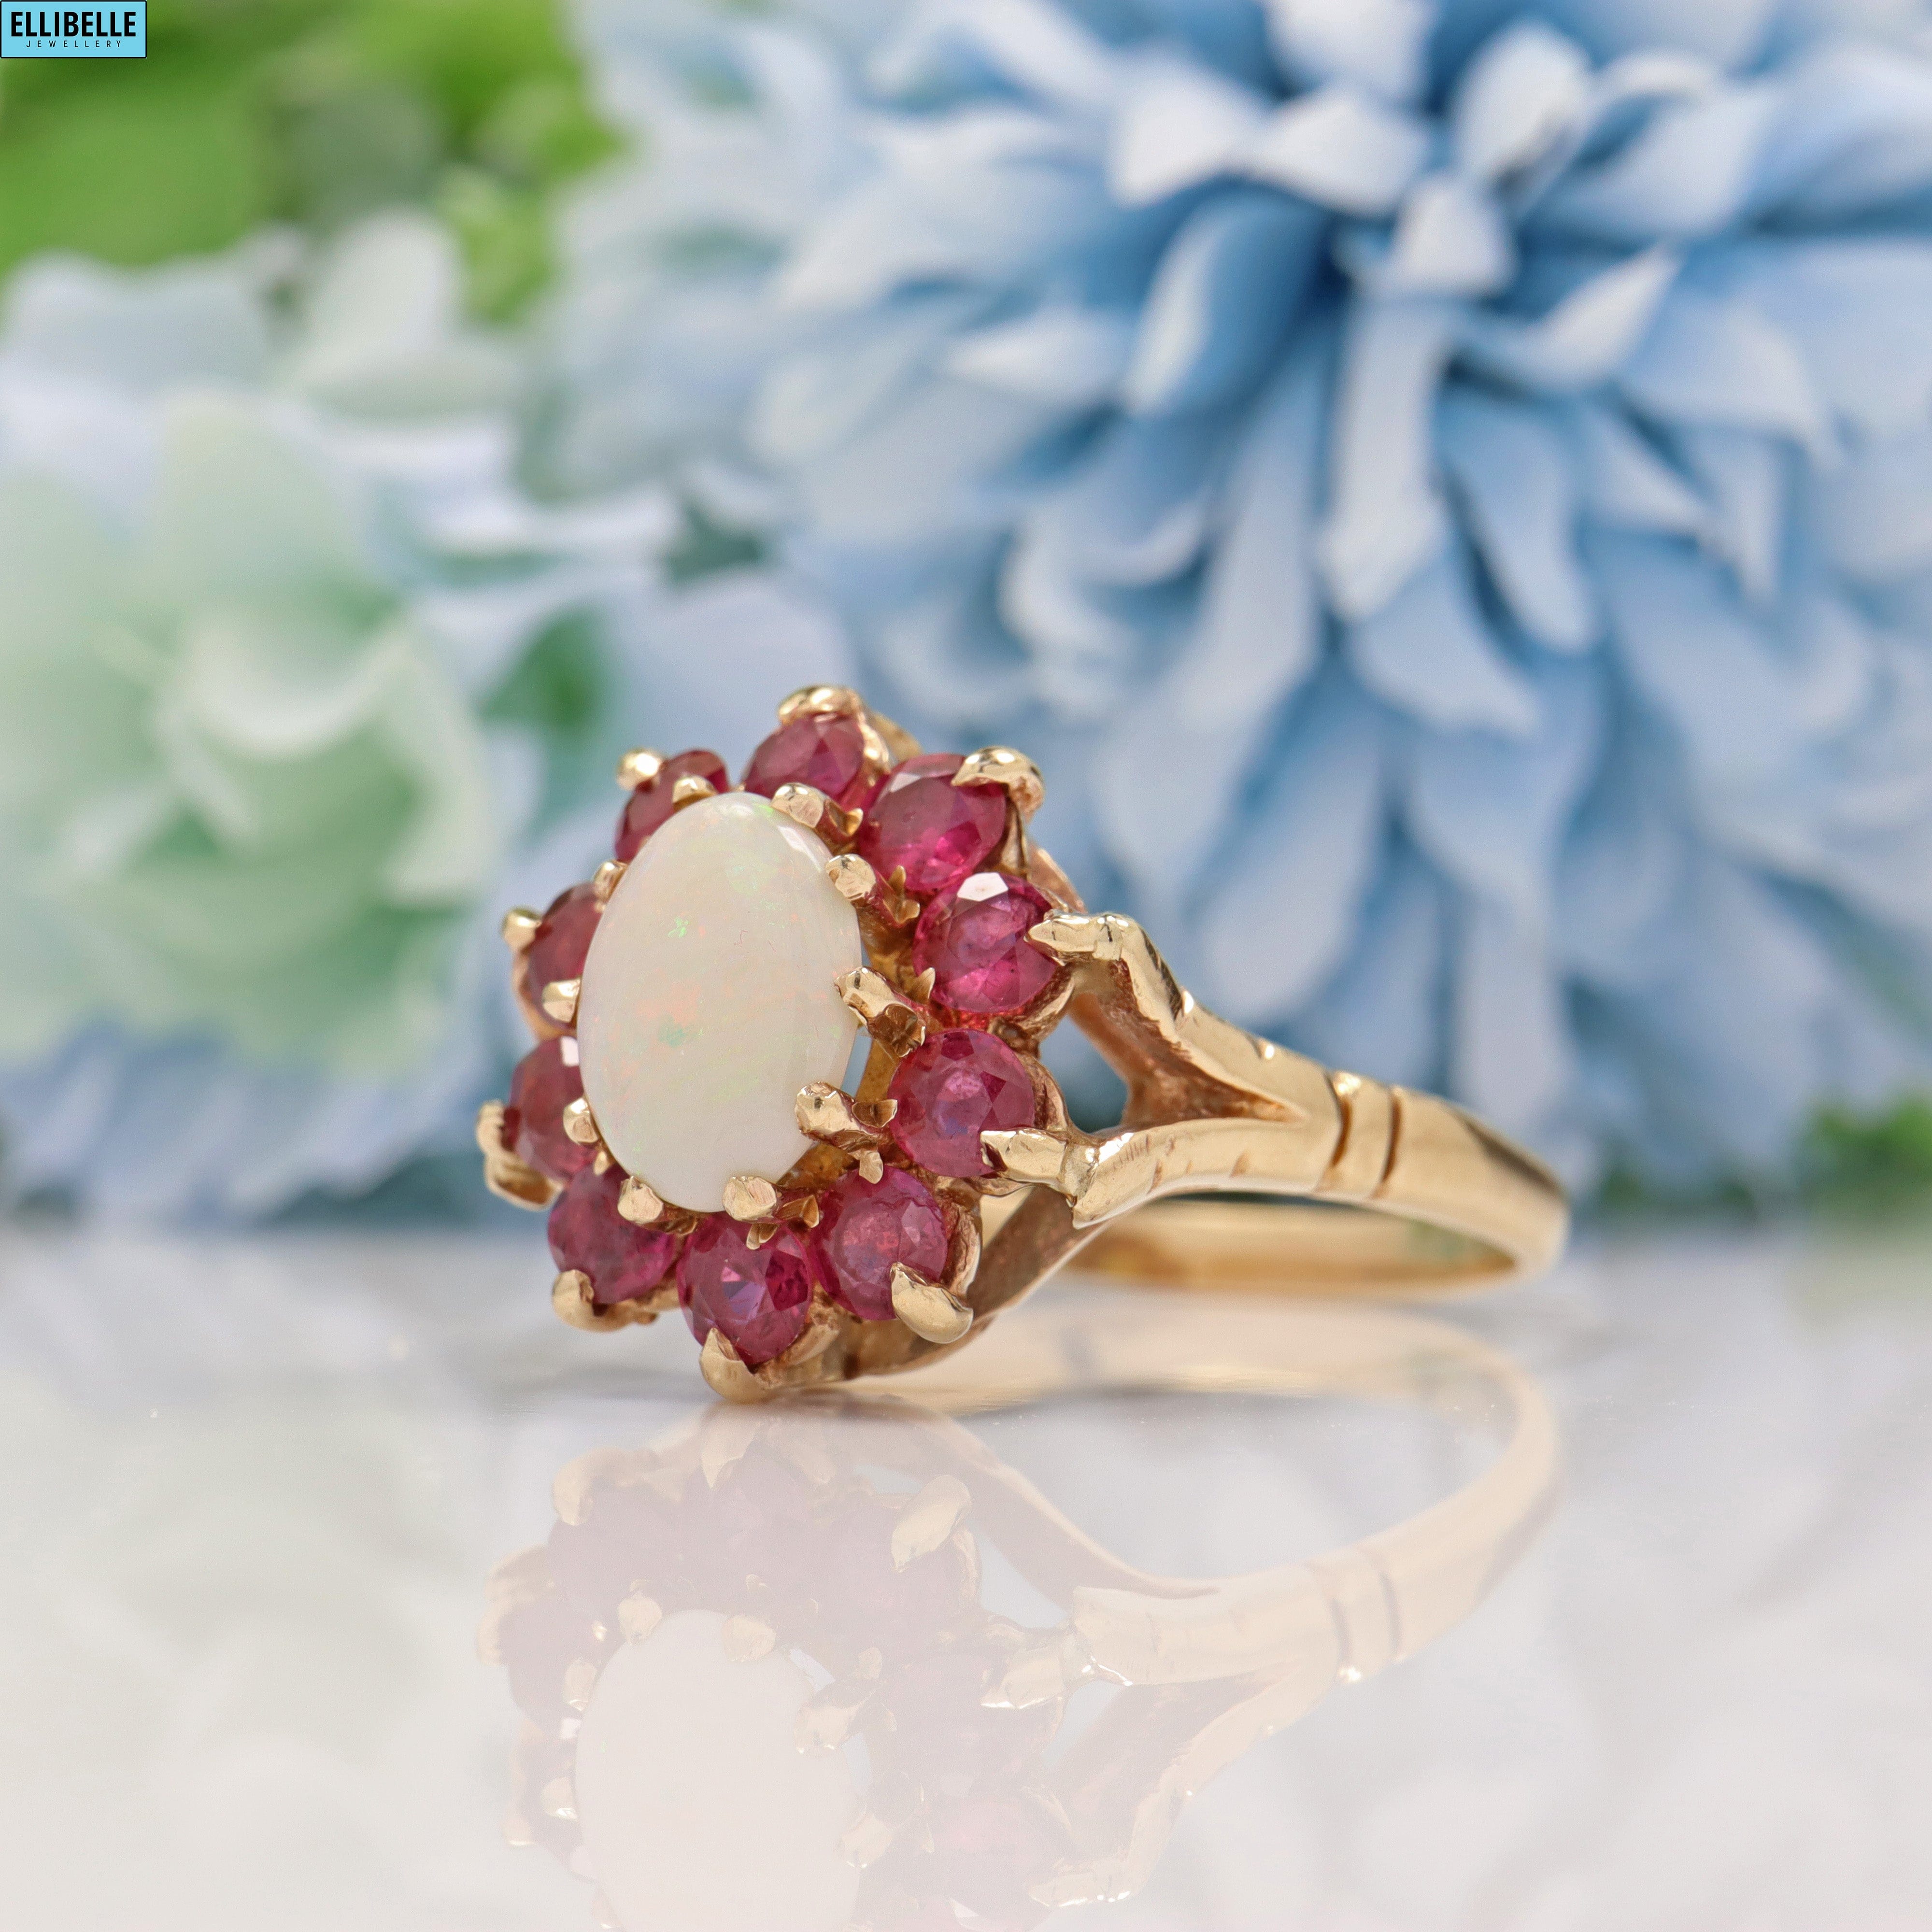 Ellibelle Jewellery VINTAGE RUBY & OPAL 9CT GOLD HALO CLUSTER RING